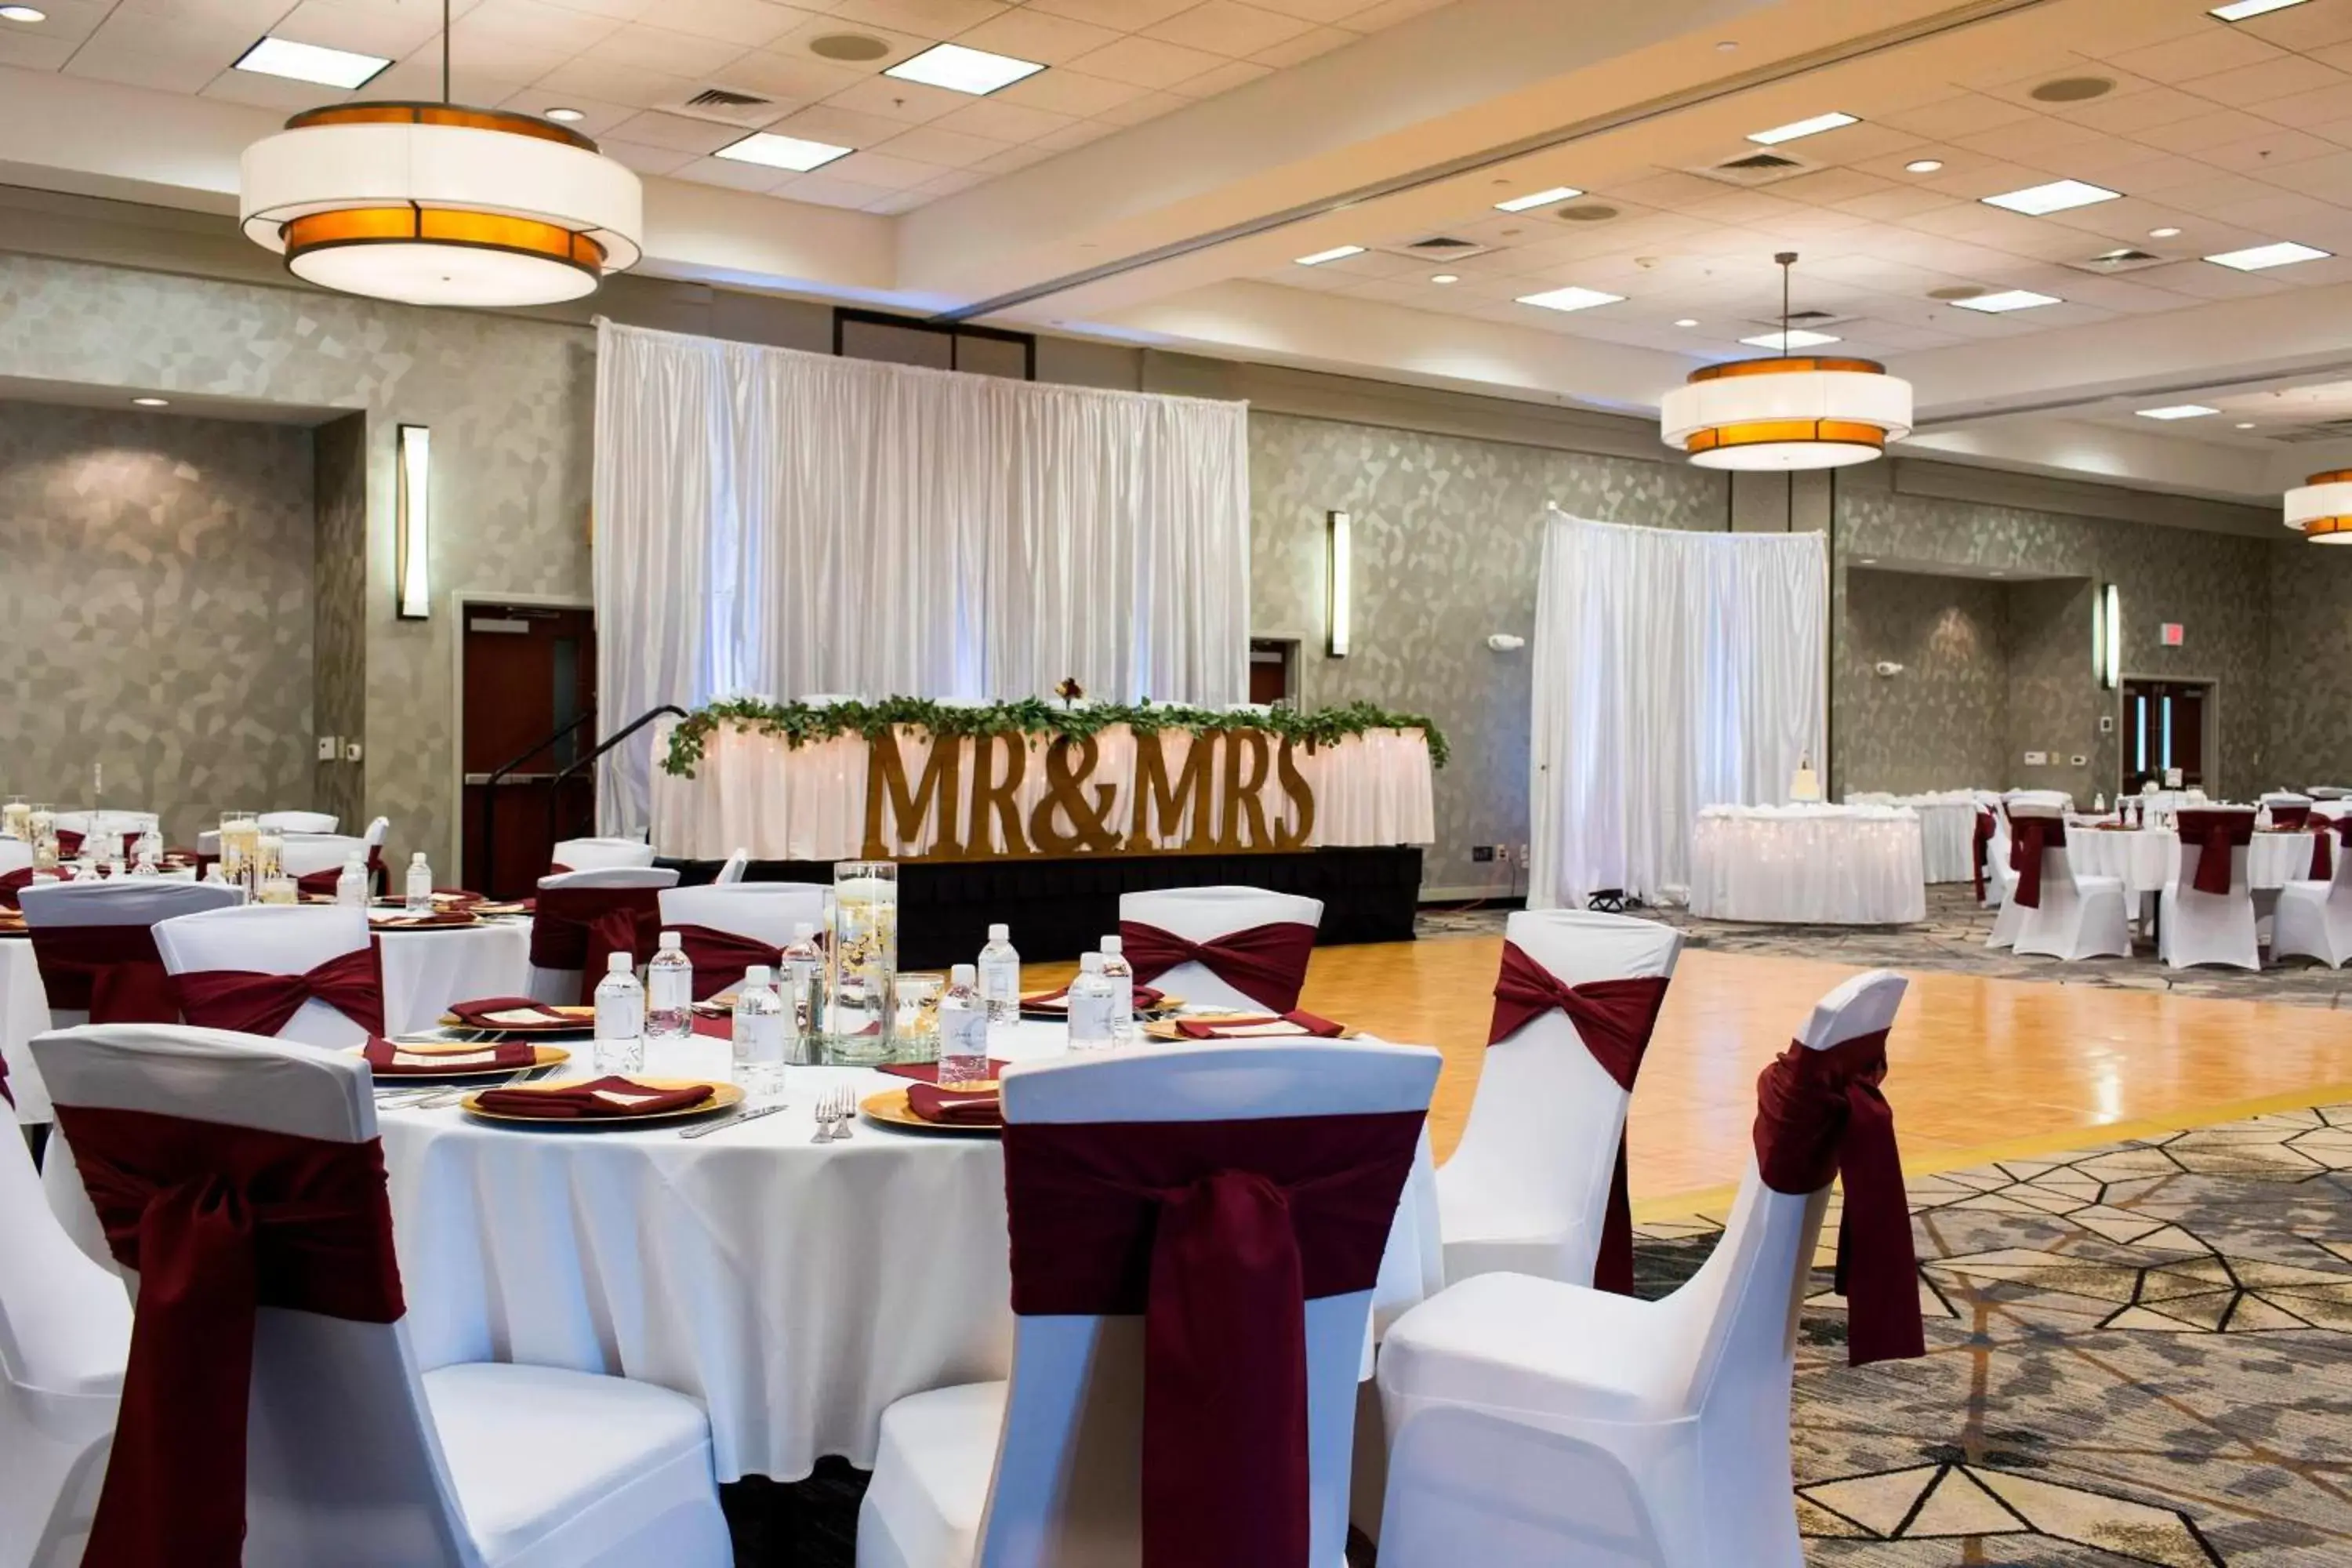 Banquet/Function facilities, Banquet Facilities in Courtyard Des Moines Ankeny